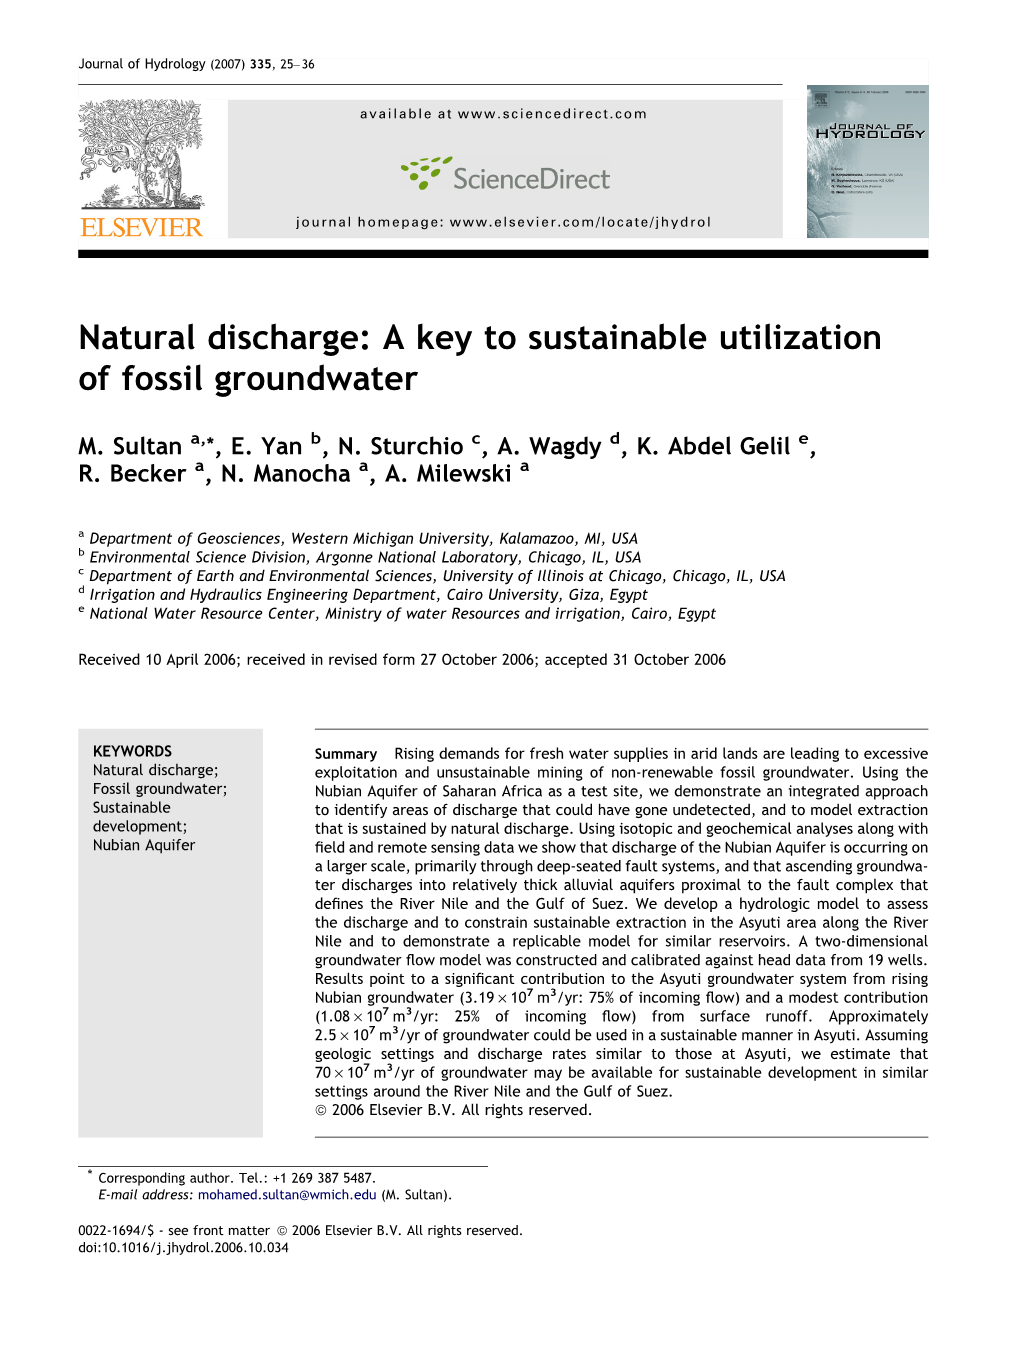 Natural Discharge: a Key to Sustainable Utilization of Fossil Groundwater